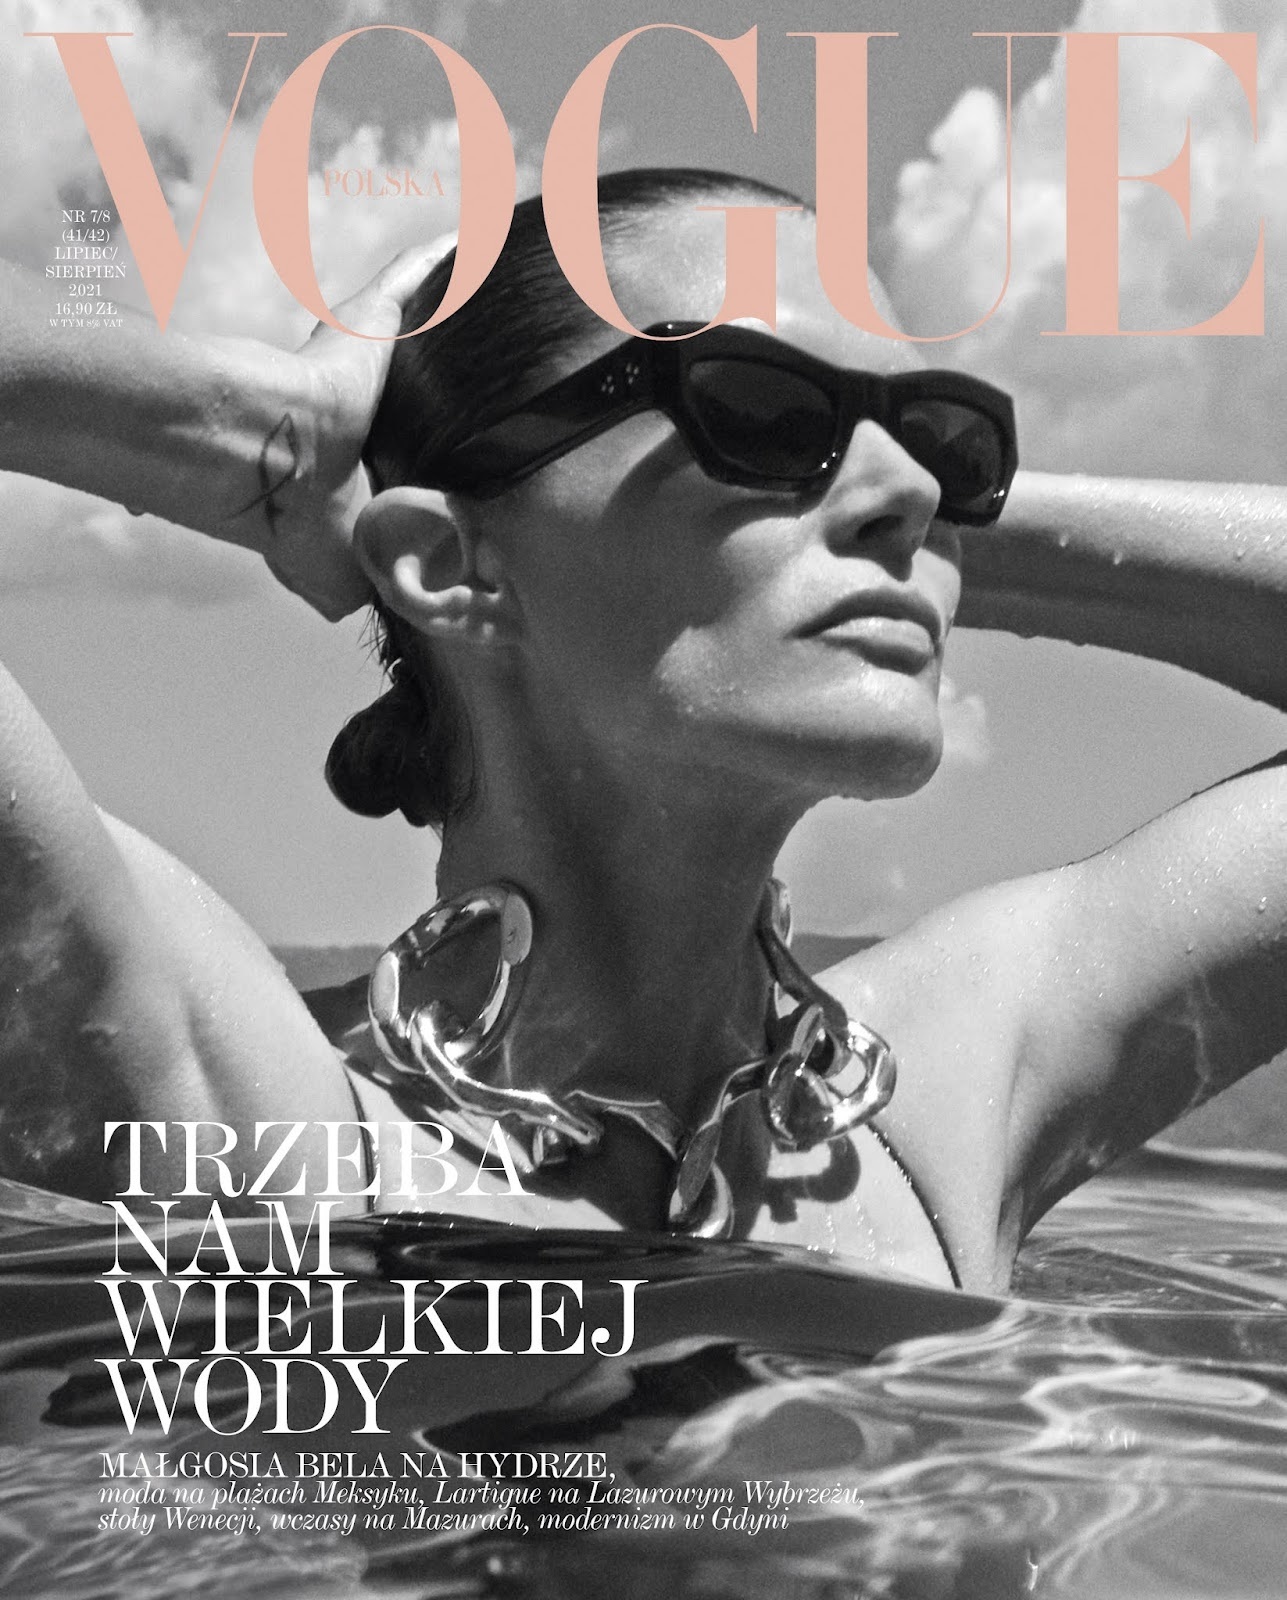 Vogue Poland August 2021 Cover Story Editorial